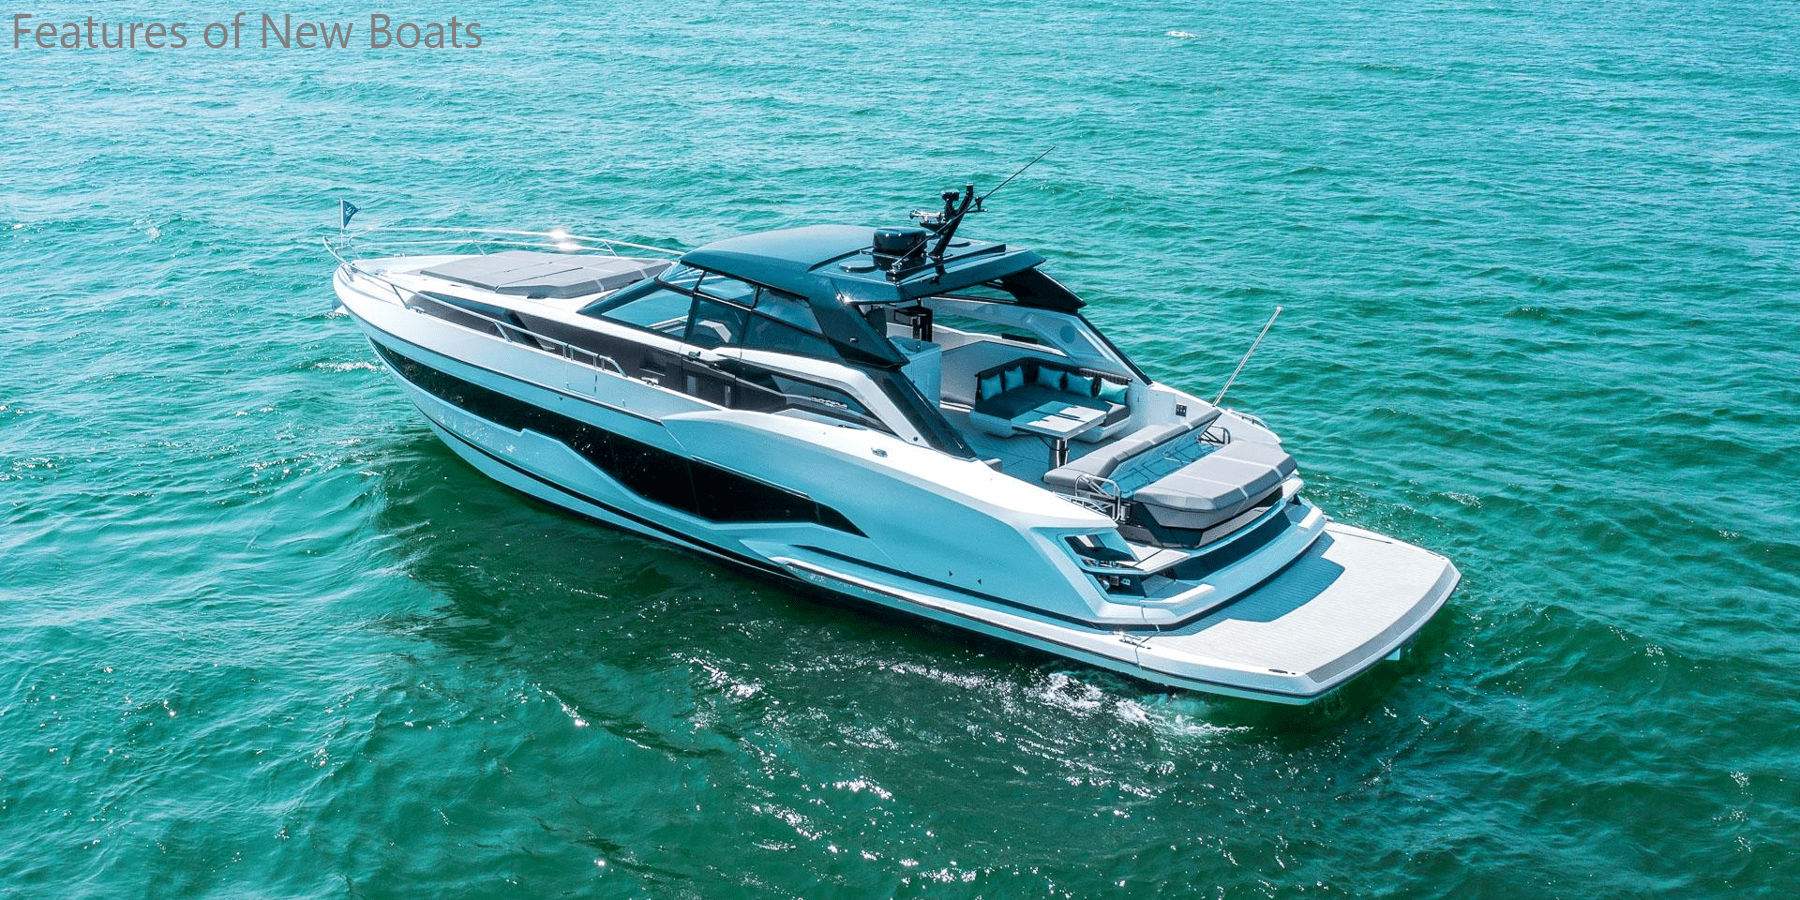 Top 5 Features of New Boats for Sale